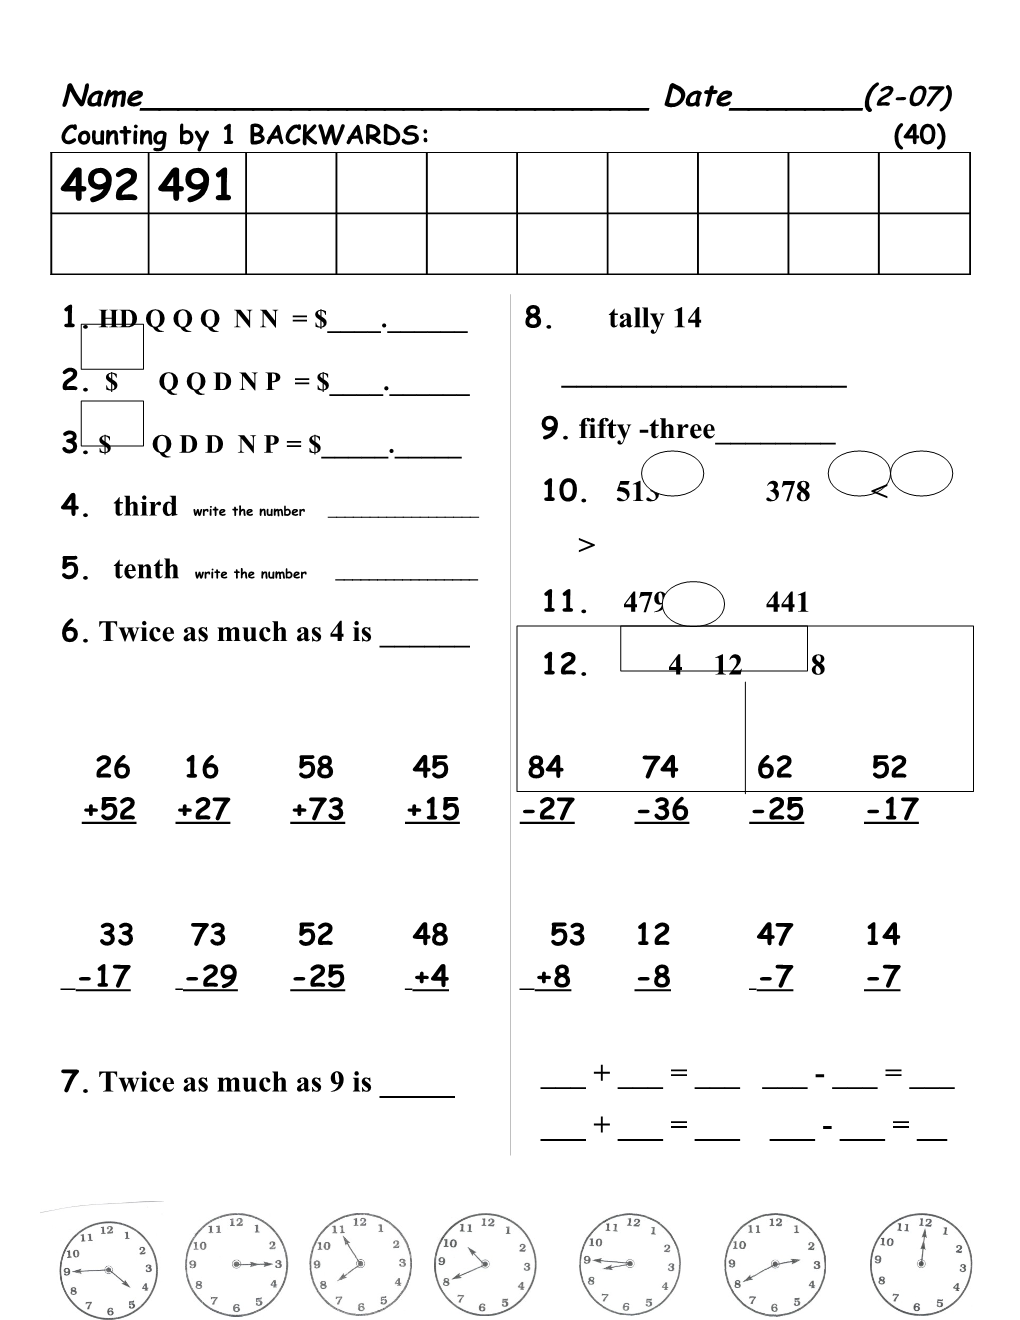 Counting by 1 BACKWARDS: (40)